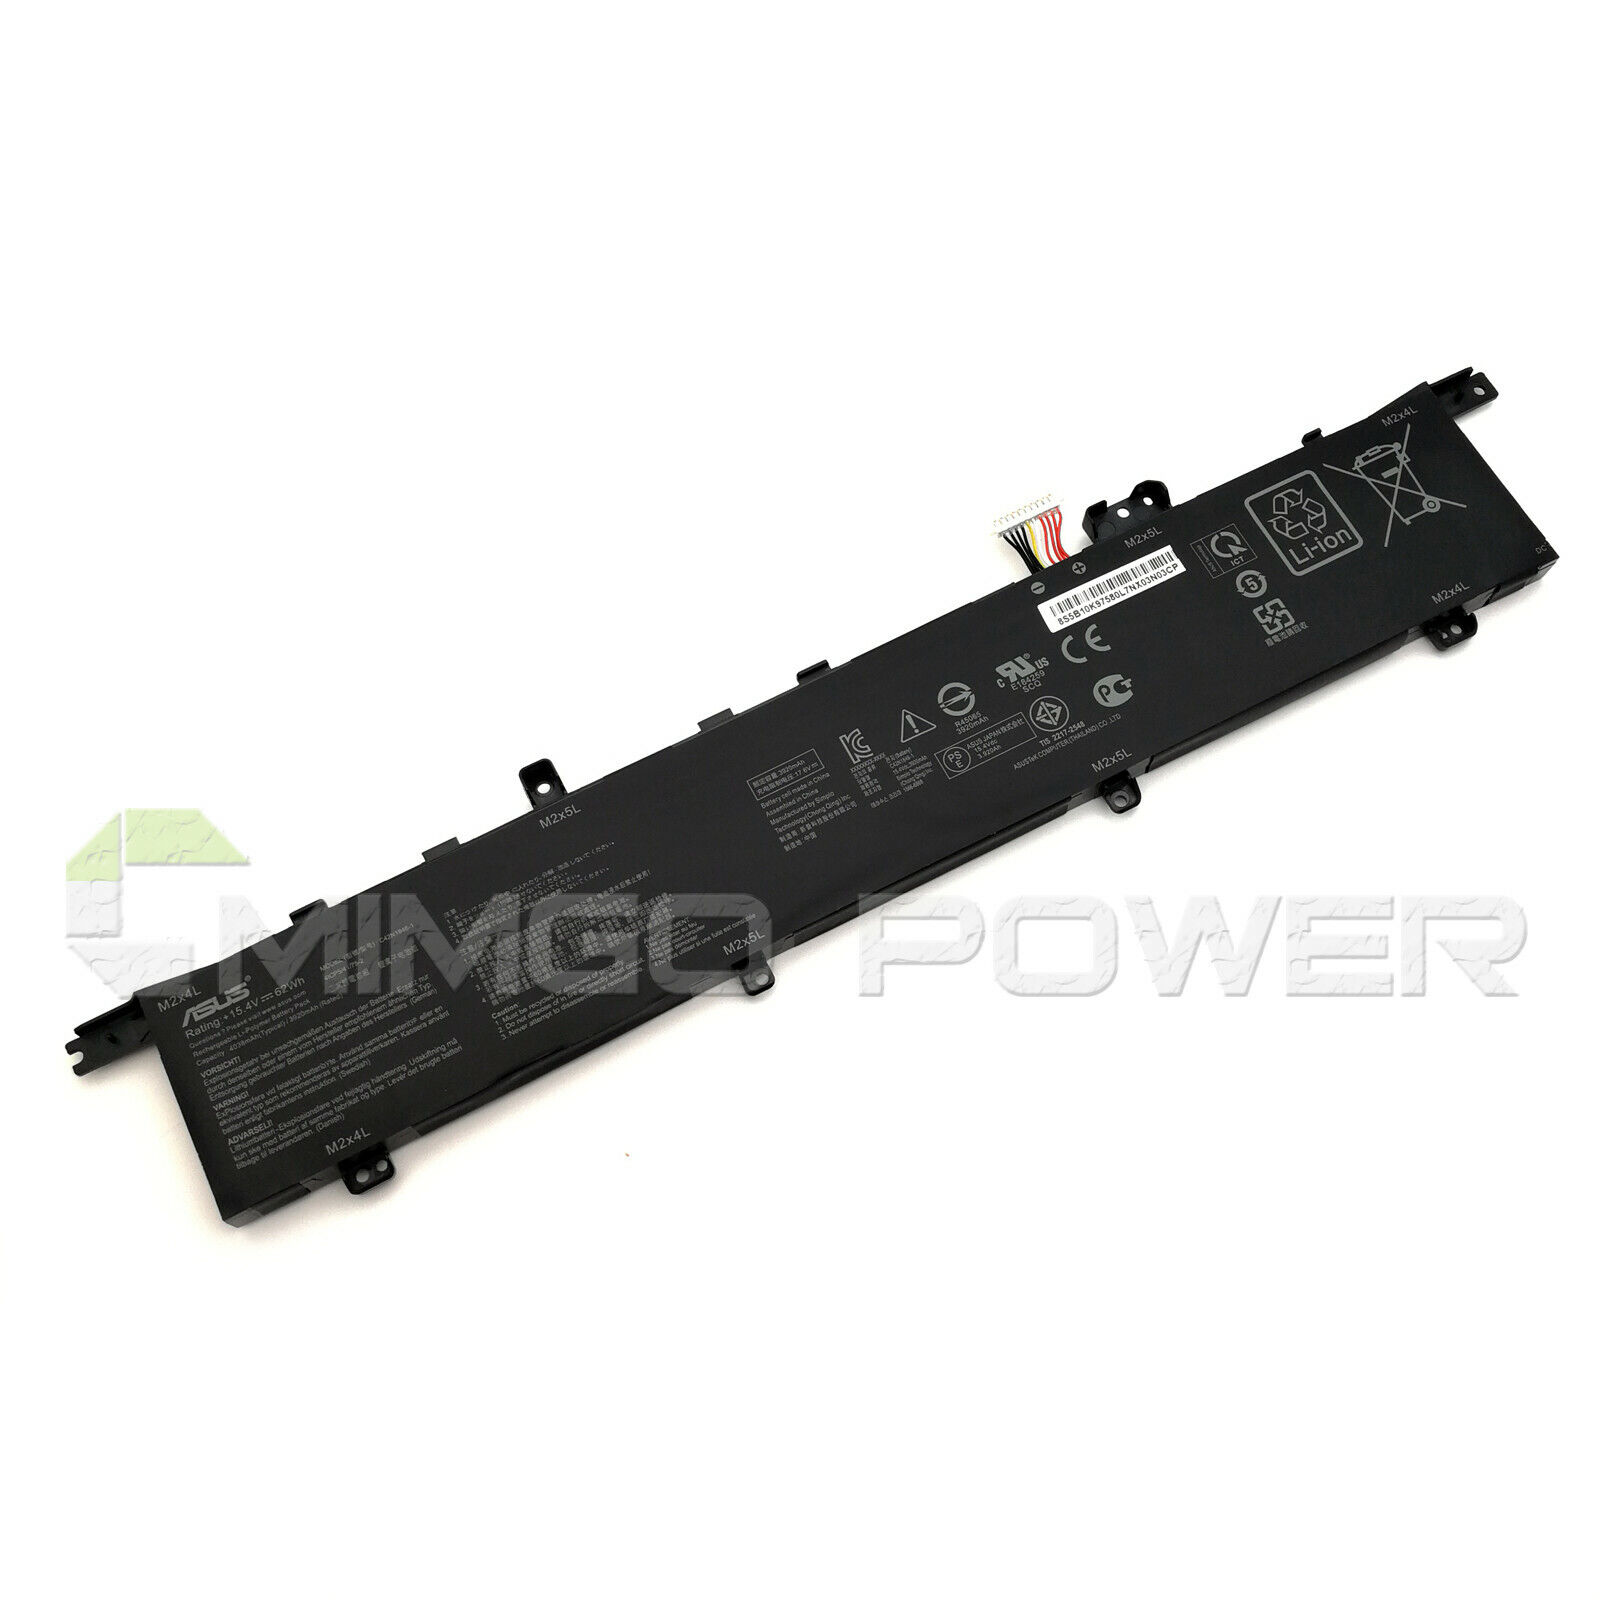 New Genuine C42N1846-1 Battery for Asus ZenBook Pro Duo UX581 UX581GV UX581LV